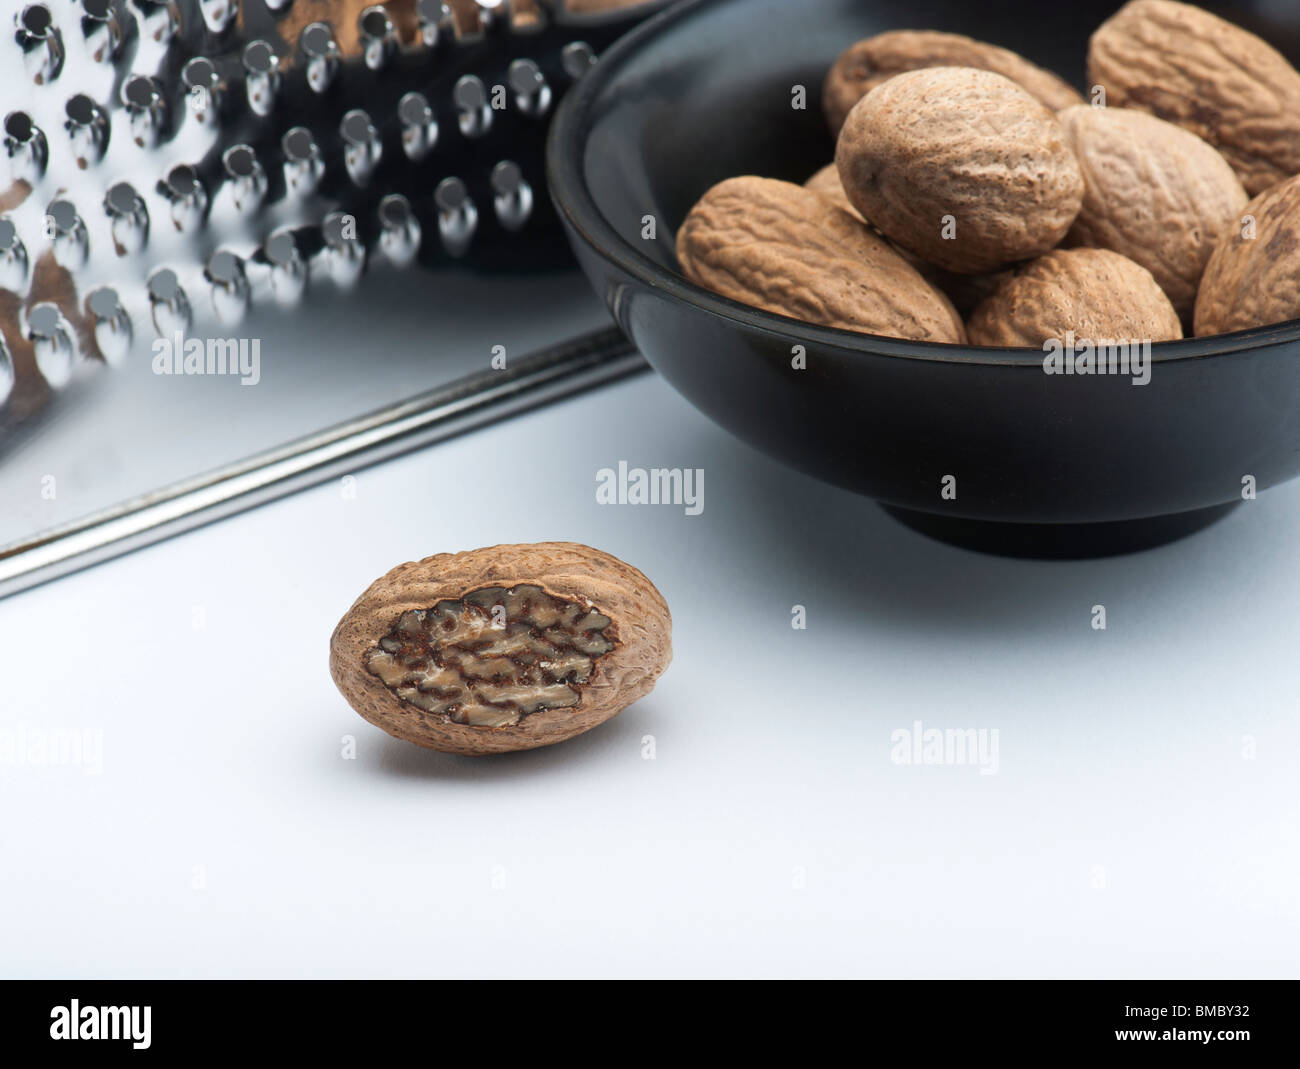 A Part Grated Nutmeg, In Front Of A Bowl Of Nutmegs and A Grater, On A White Background Stock Photo